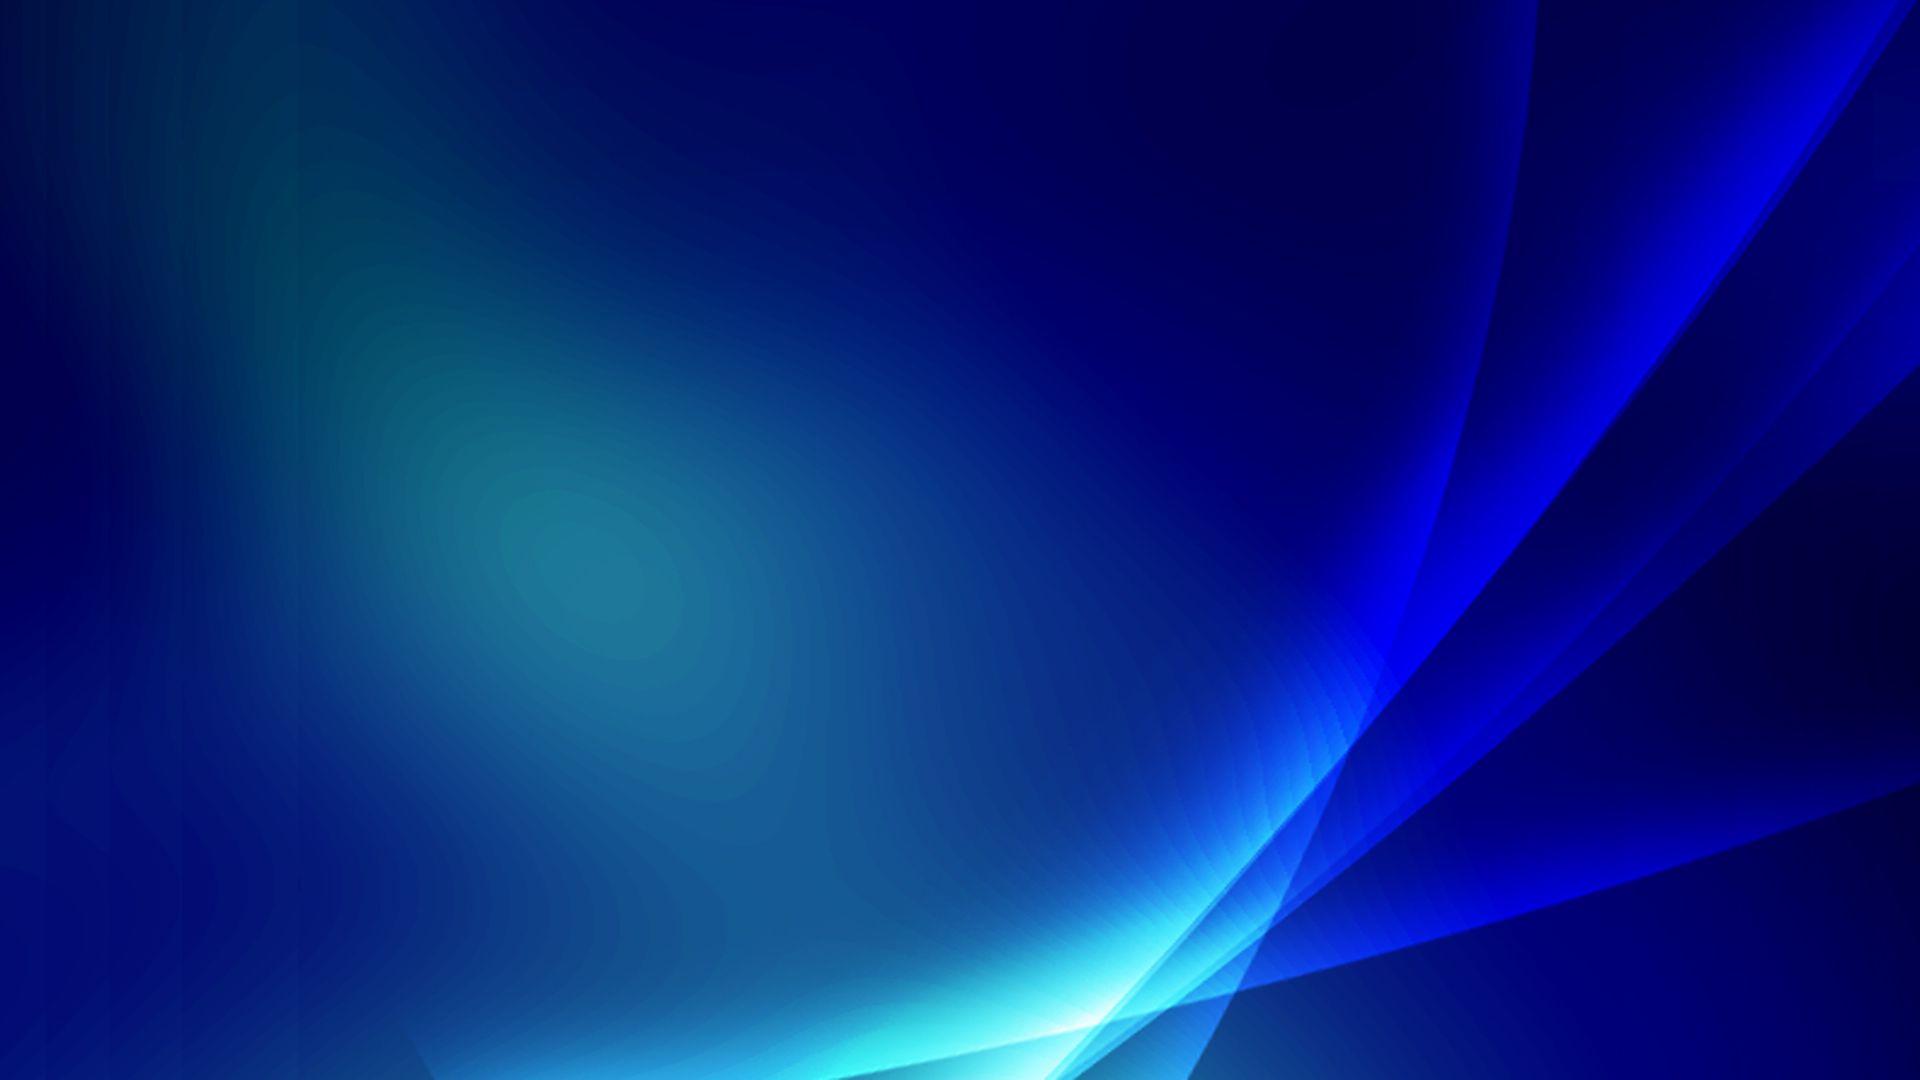 Wallpapers For > Plain Royal Blue Backgrounds